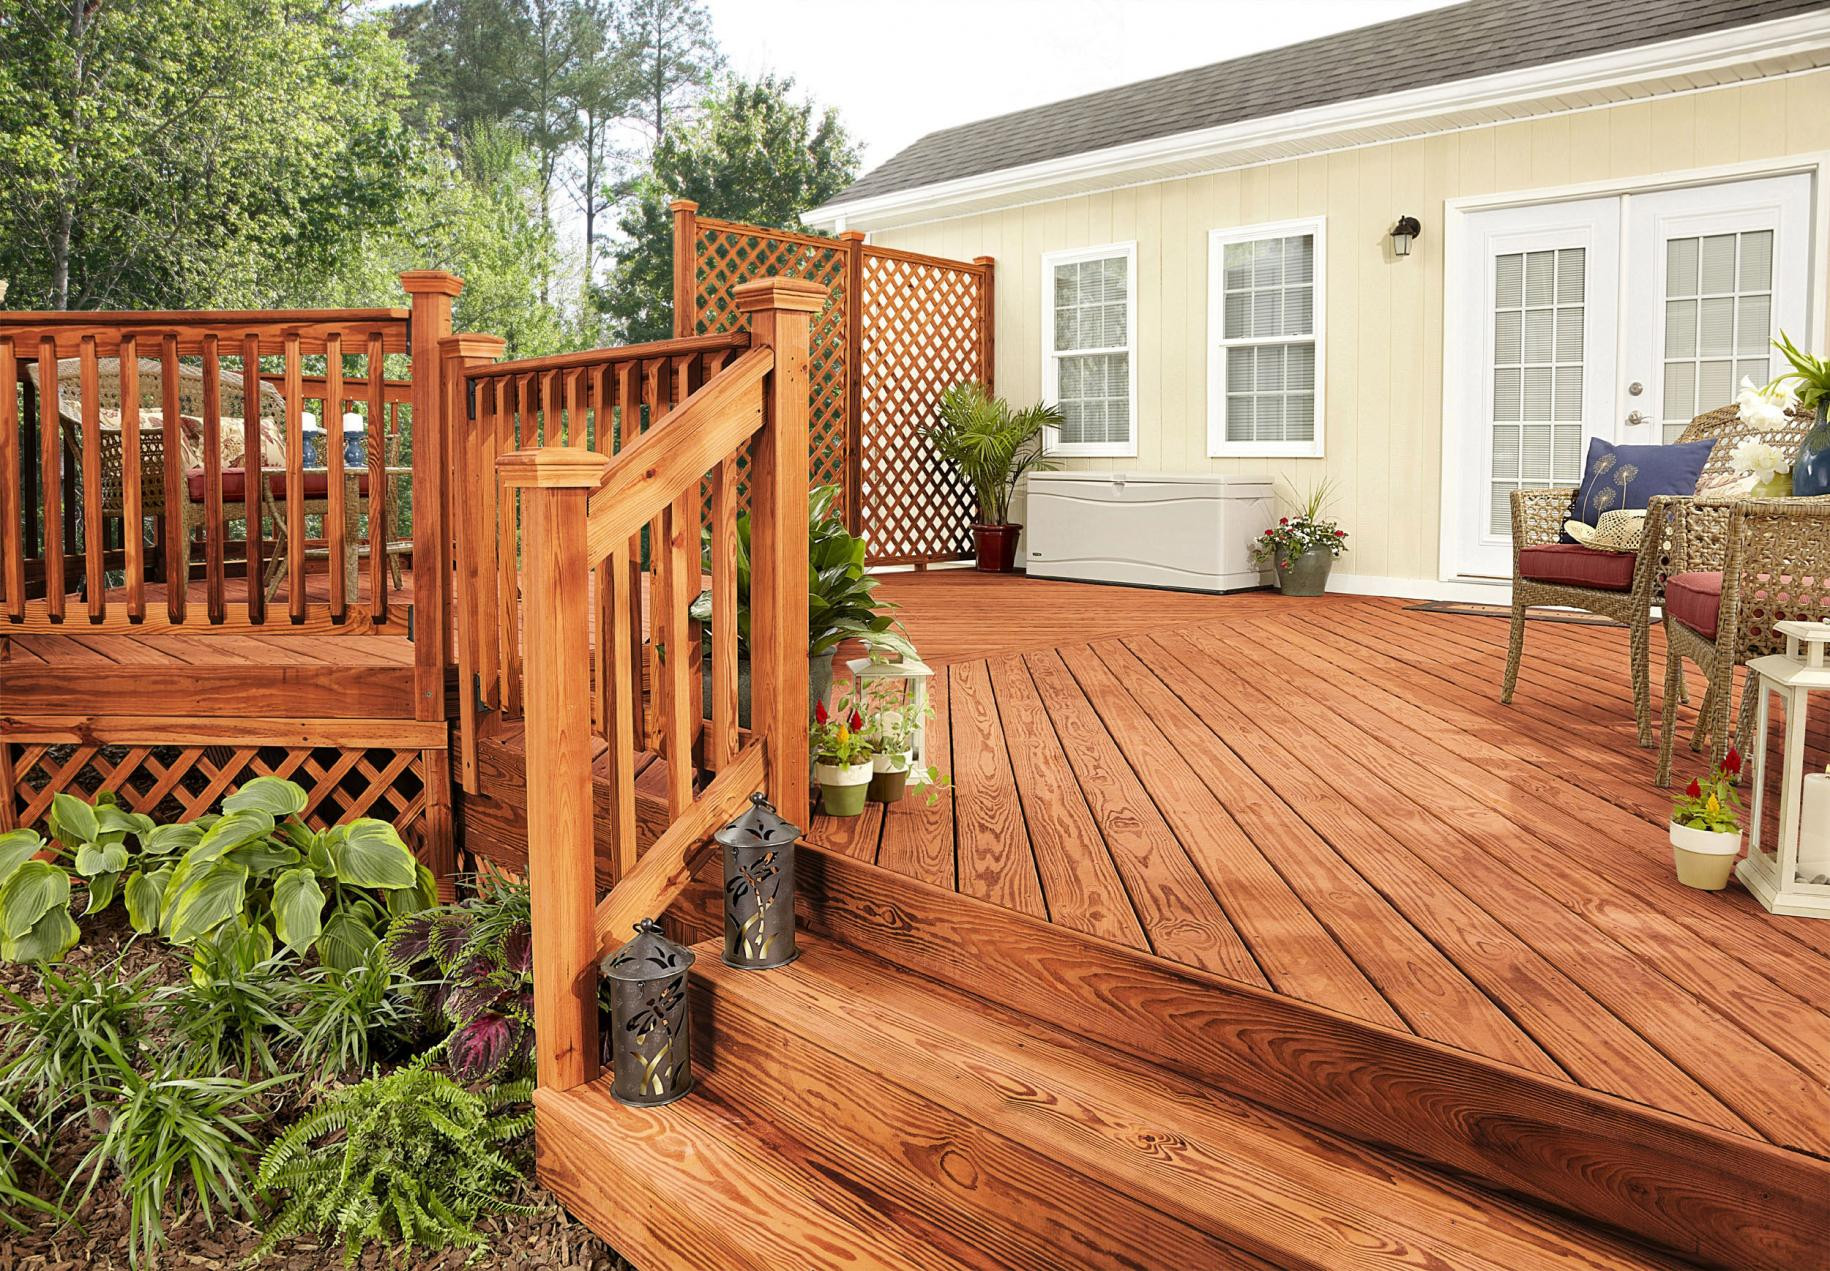 Olympic Deck Paint
 Deck Best Olympic Deck Stain For Deck Color Design